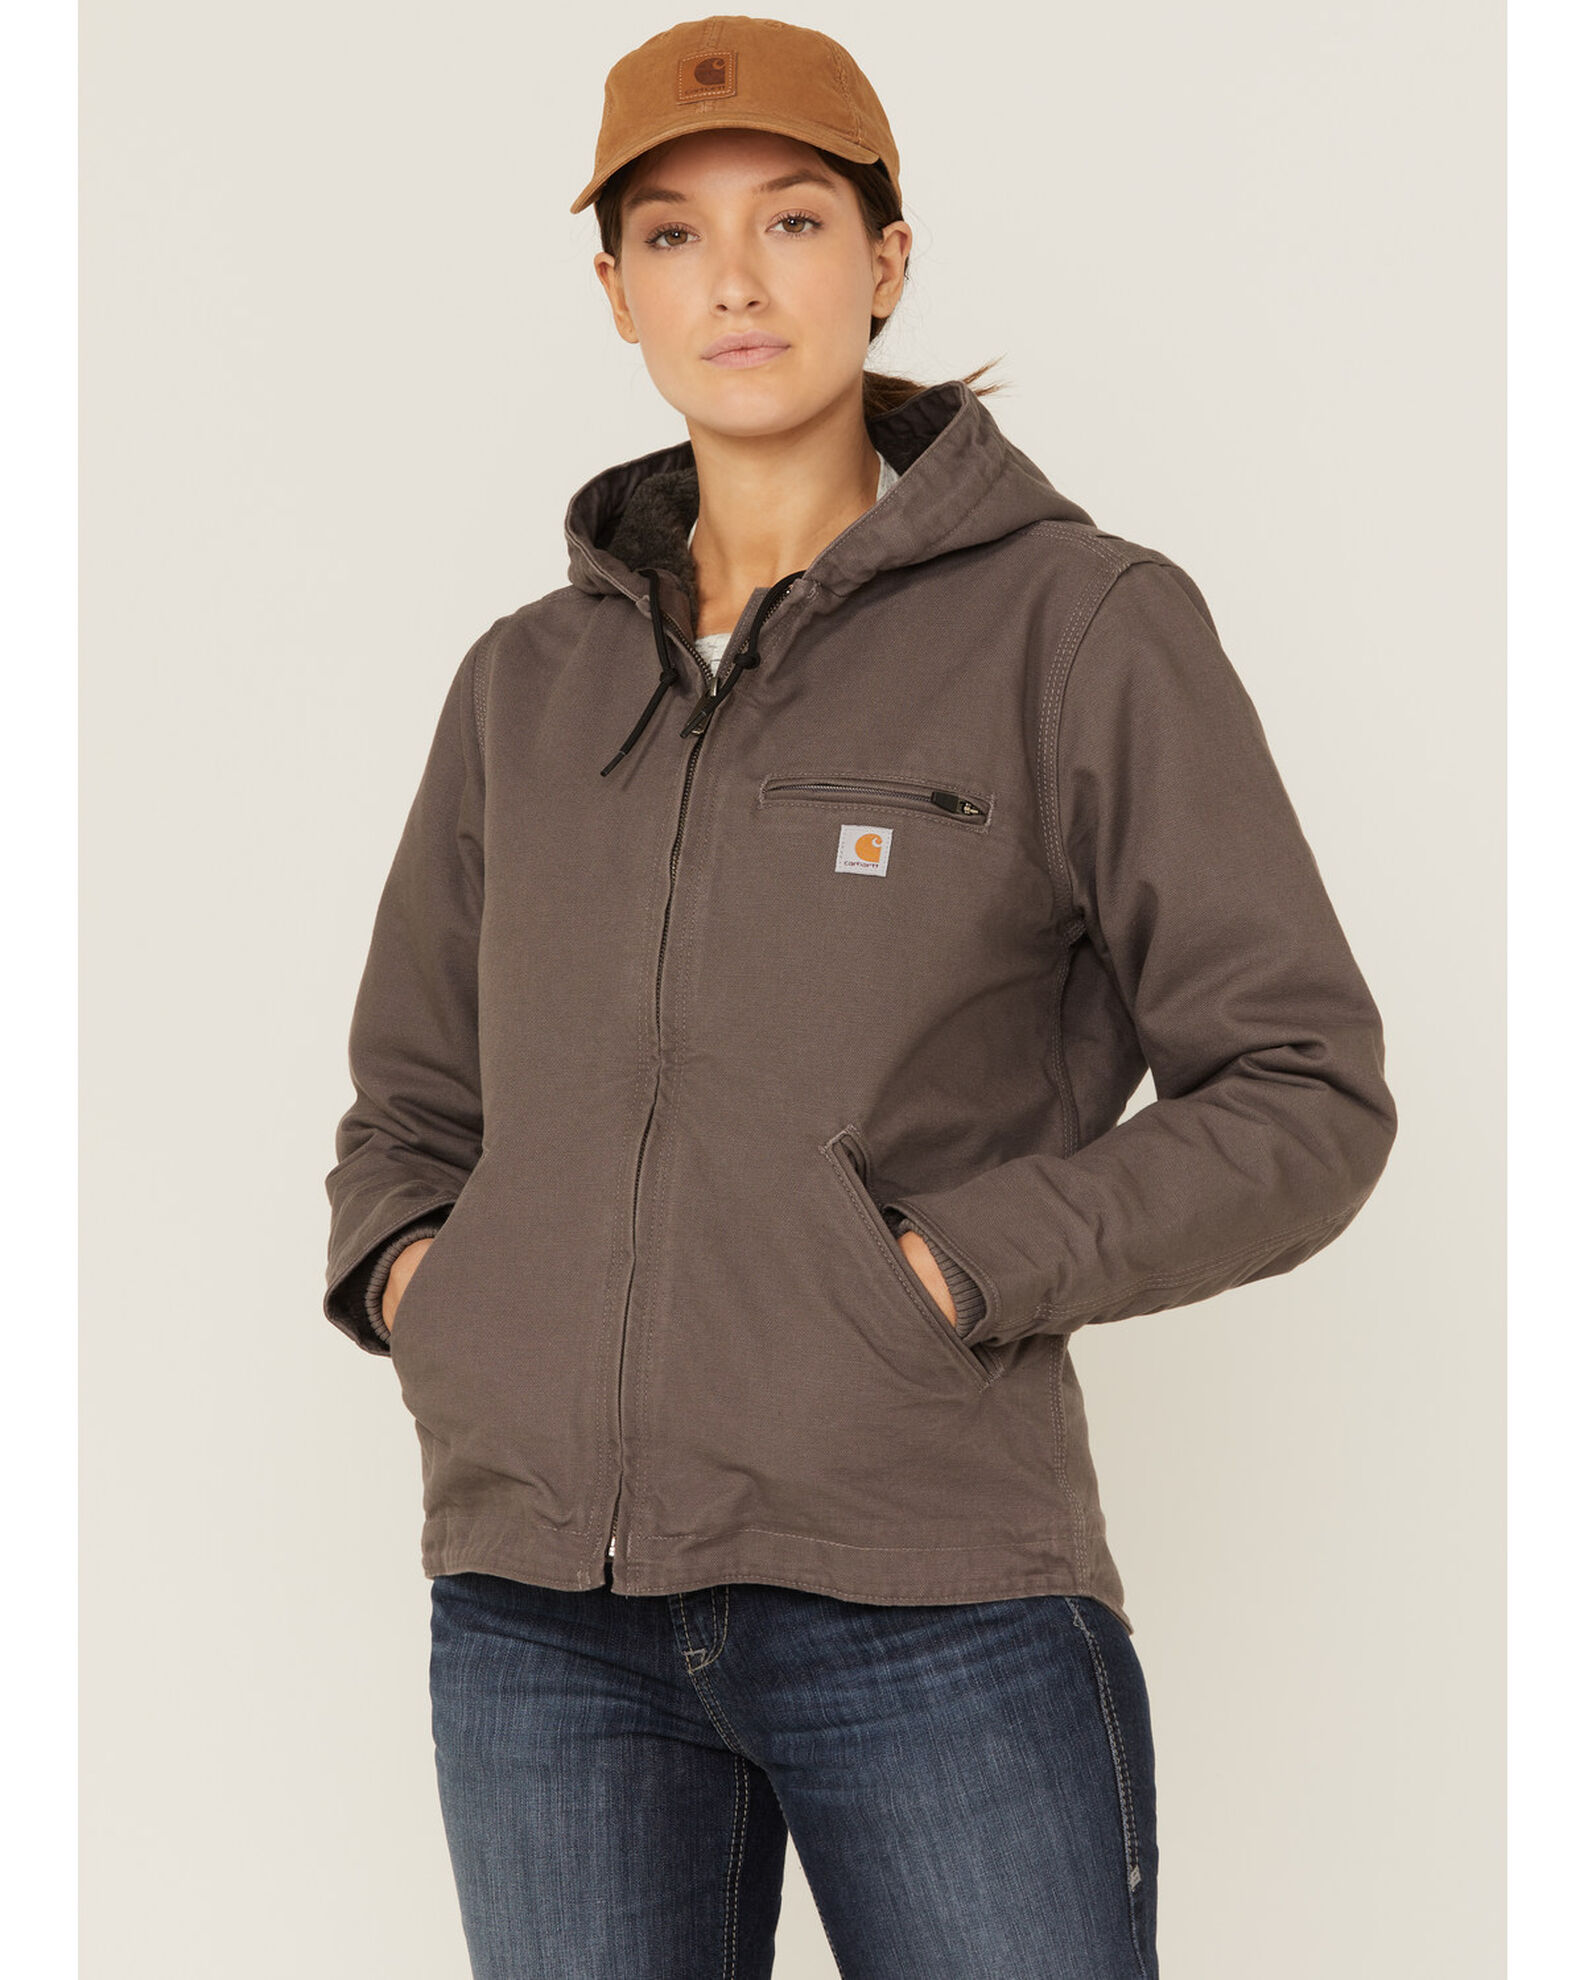 Product Name: Carhartt Women's Taupe Washed Duck Sherpa-Lined Jacket